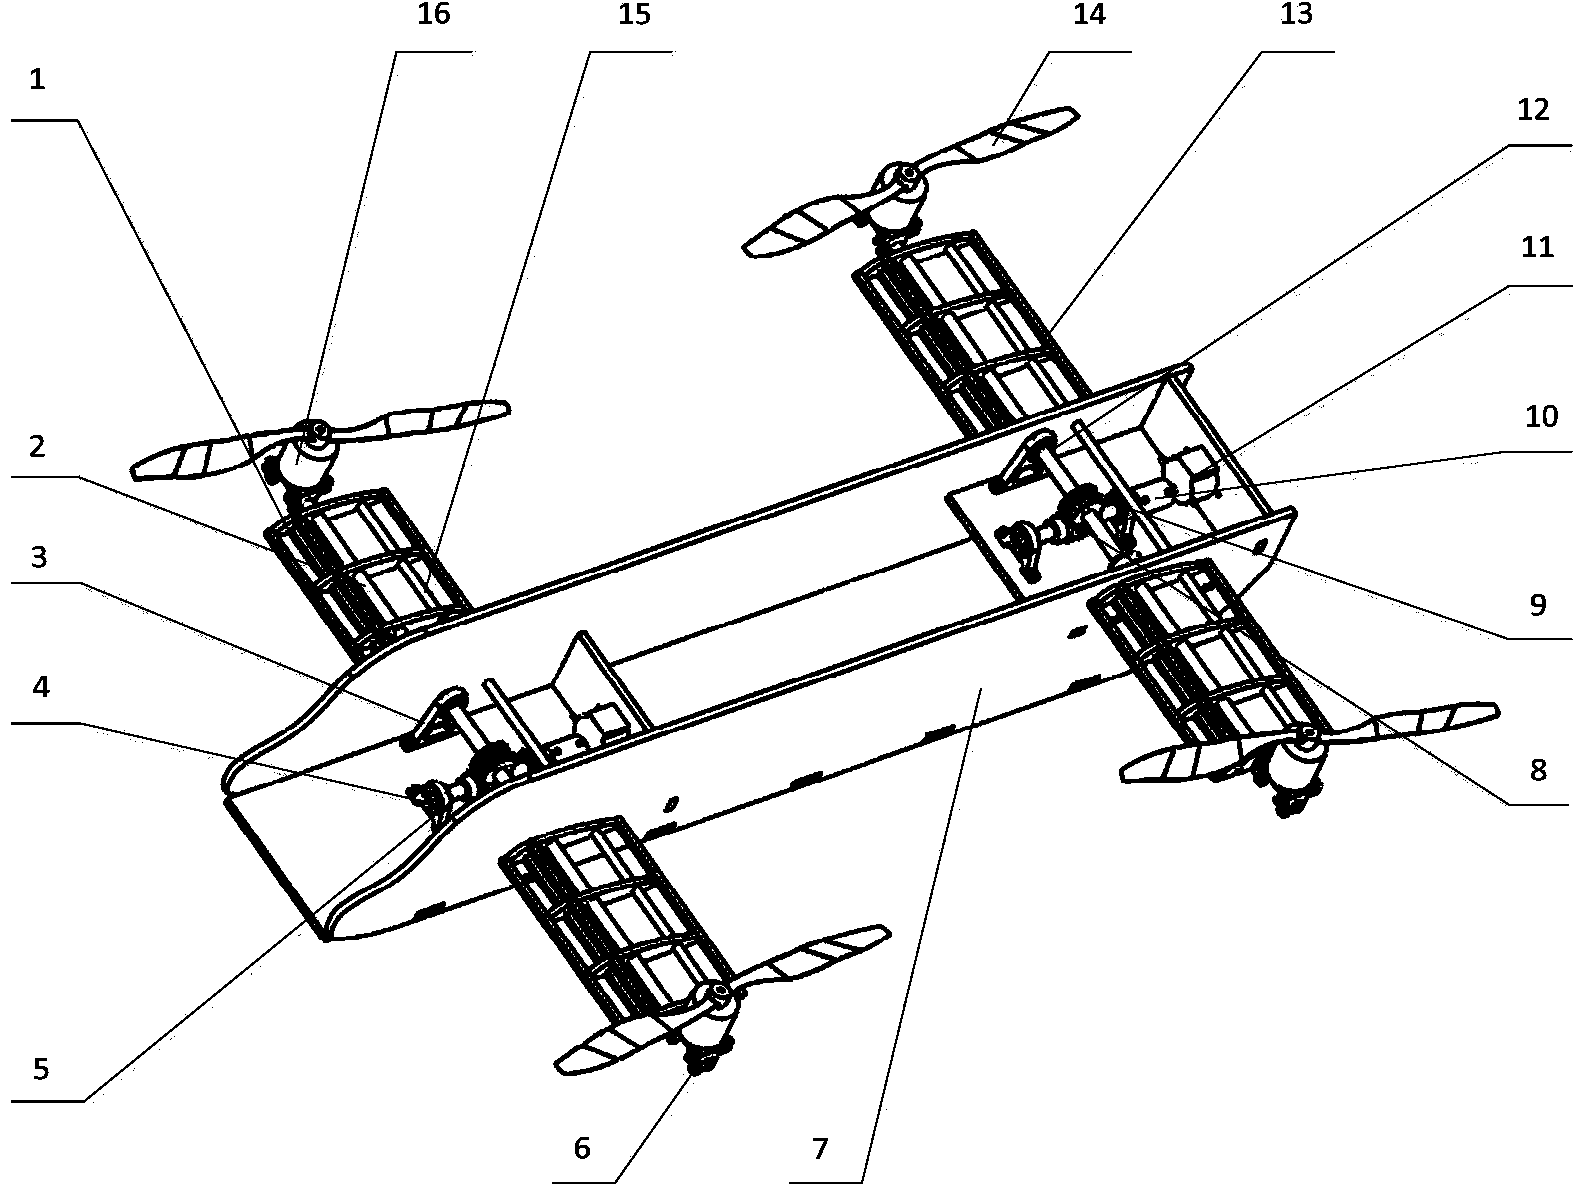 Tilted four-rotor aircraft